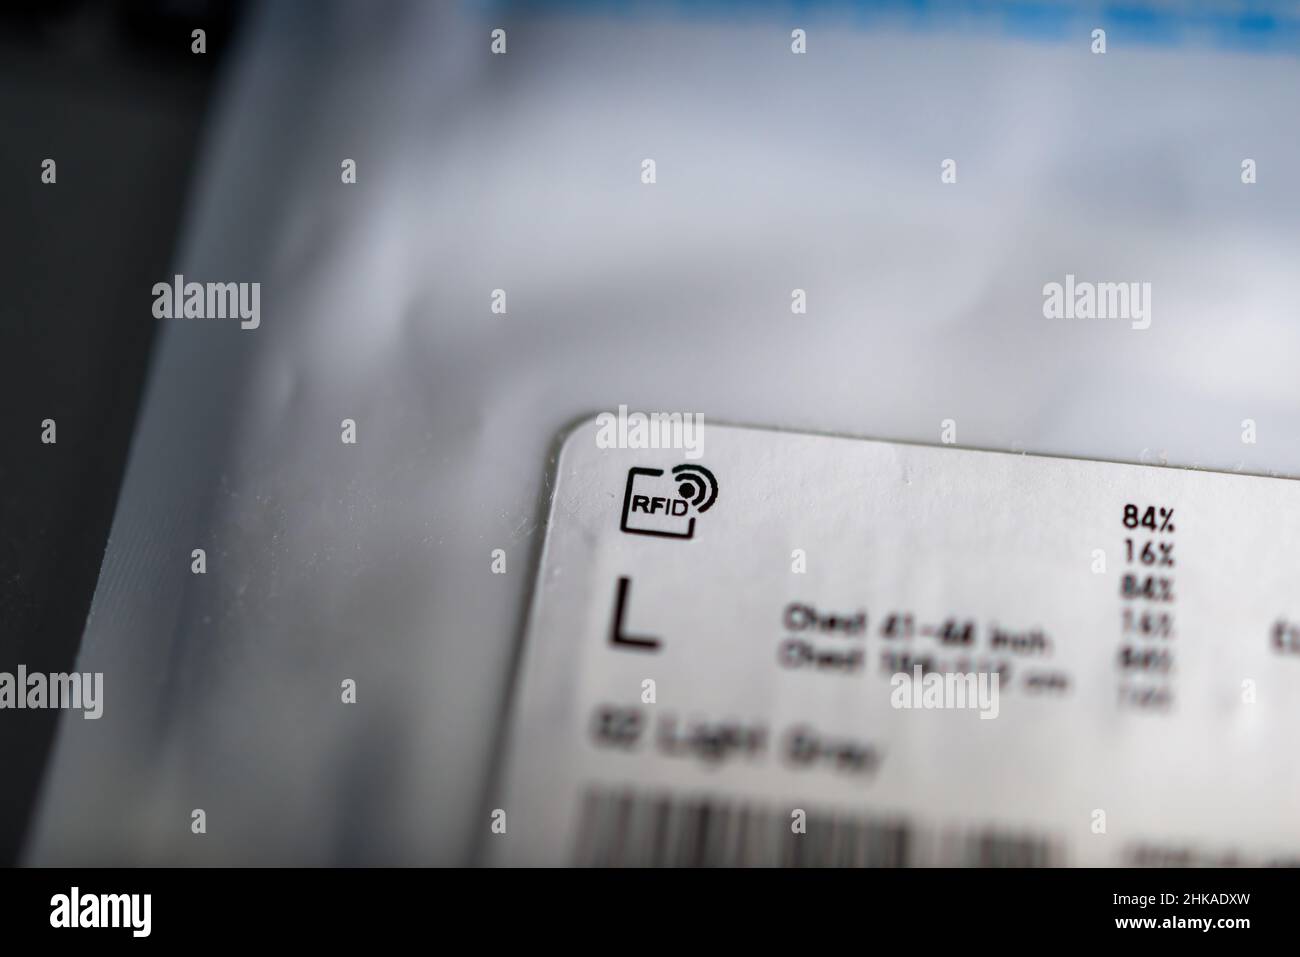 London, United Kingdom - Dec 25, 2018: RFID acronym of Radio-frequency  identification sticker tag etiquette on the clothes packaging Stock Photo -  Alamy